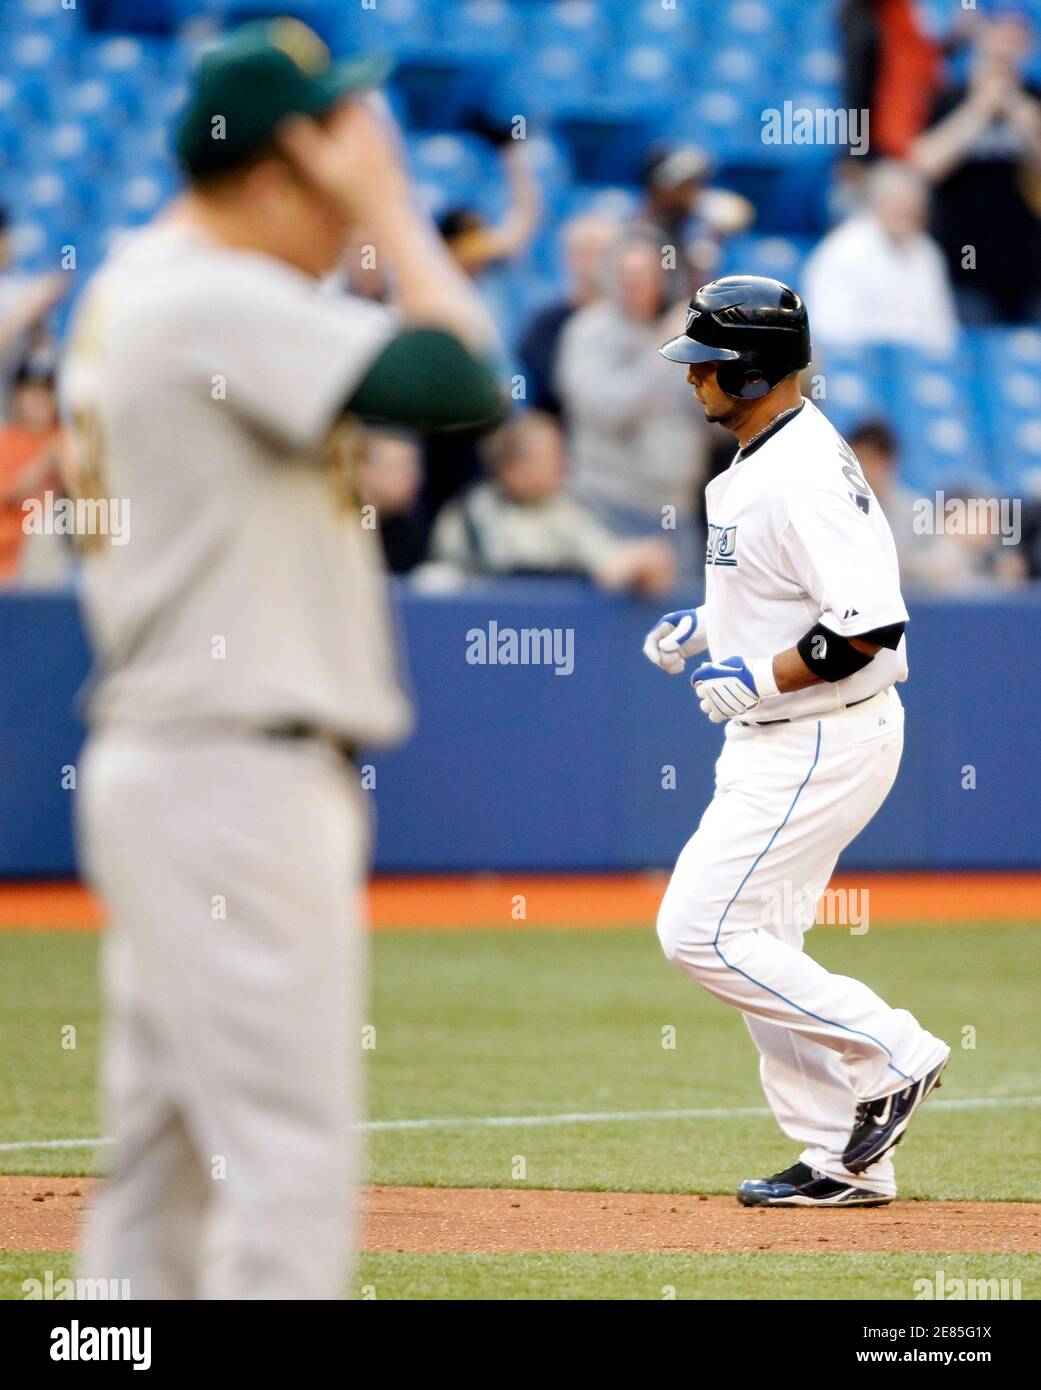 Toronto Blue Jays batter Alex Gonzalez (R) runs behind Oakland Athletics  pitcher Trevor Cahill after hitting a three-run home run during the second  inning of their MLB American League baseball game in